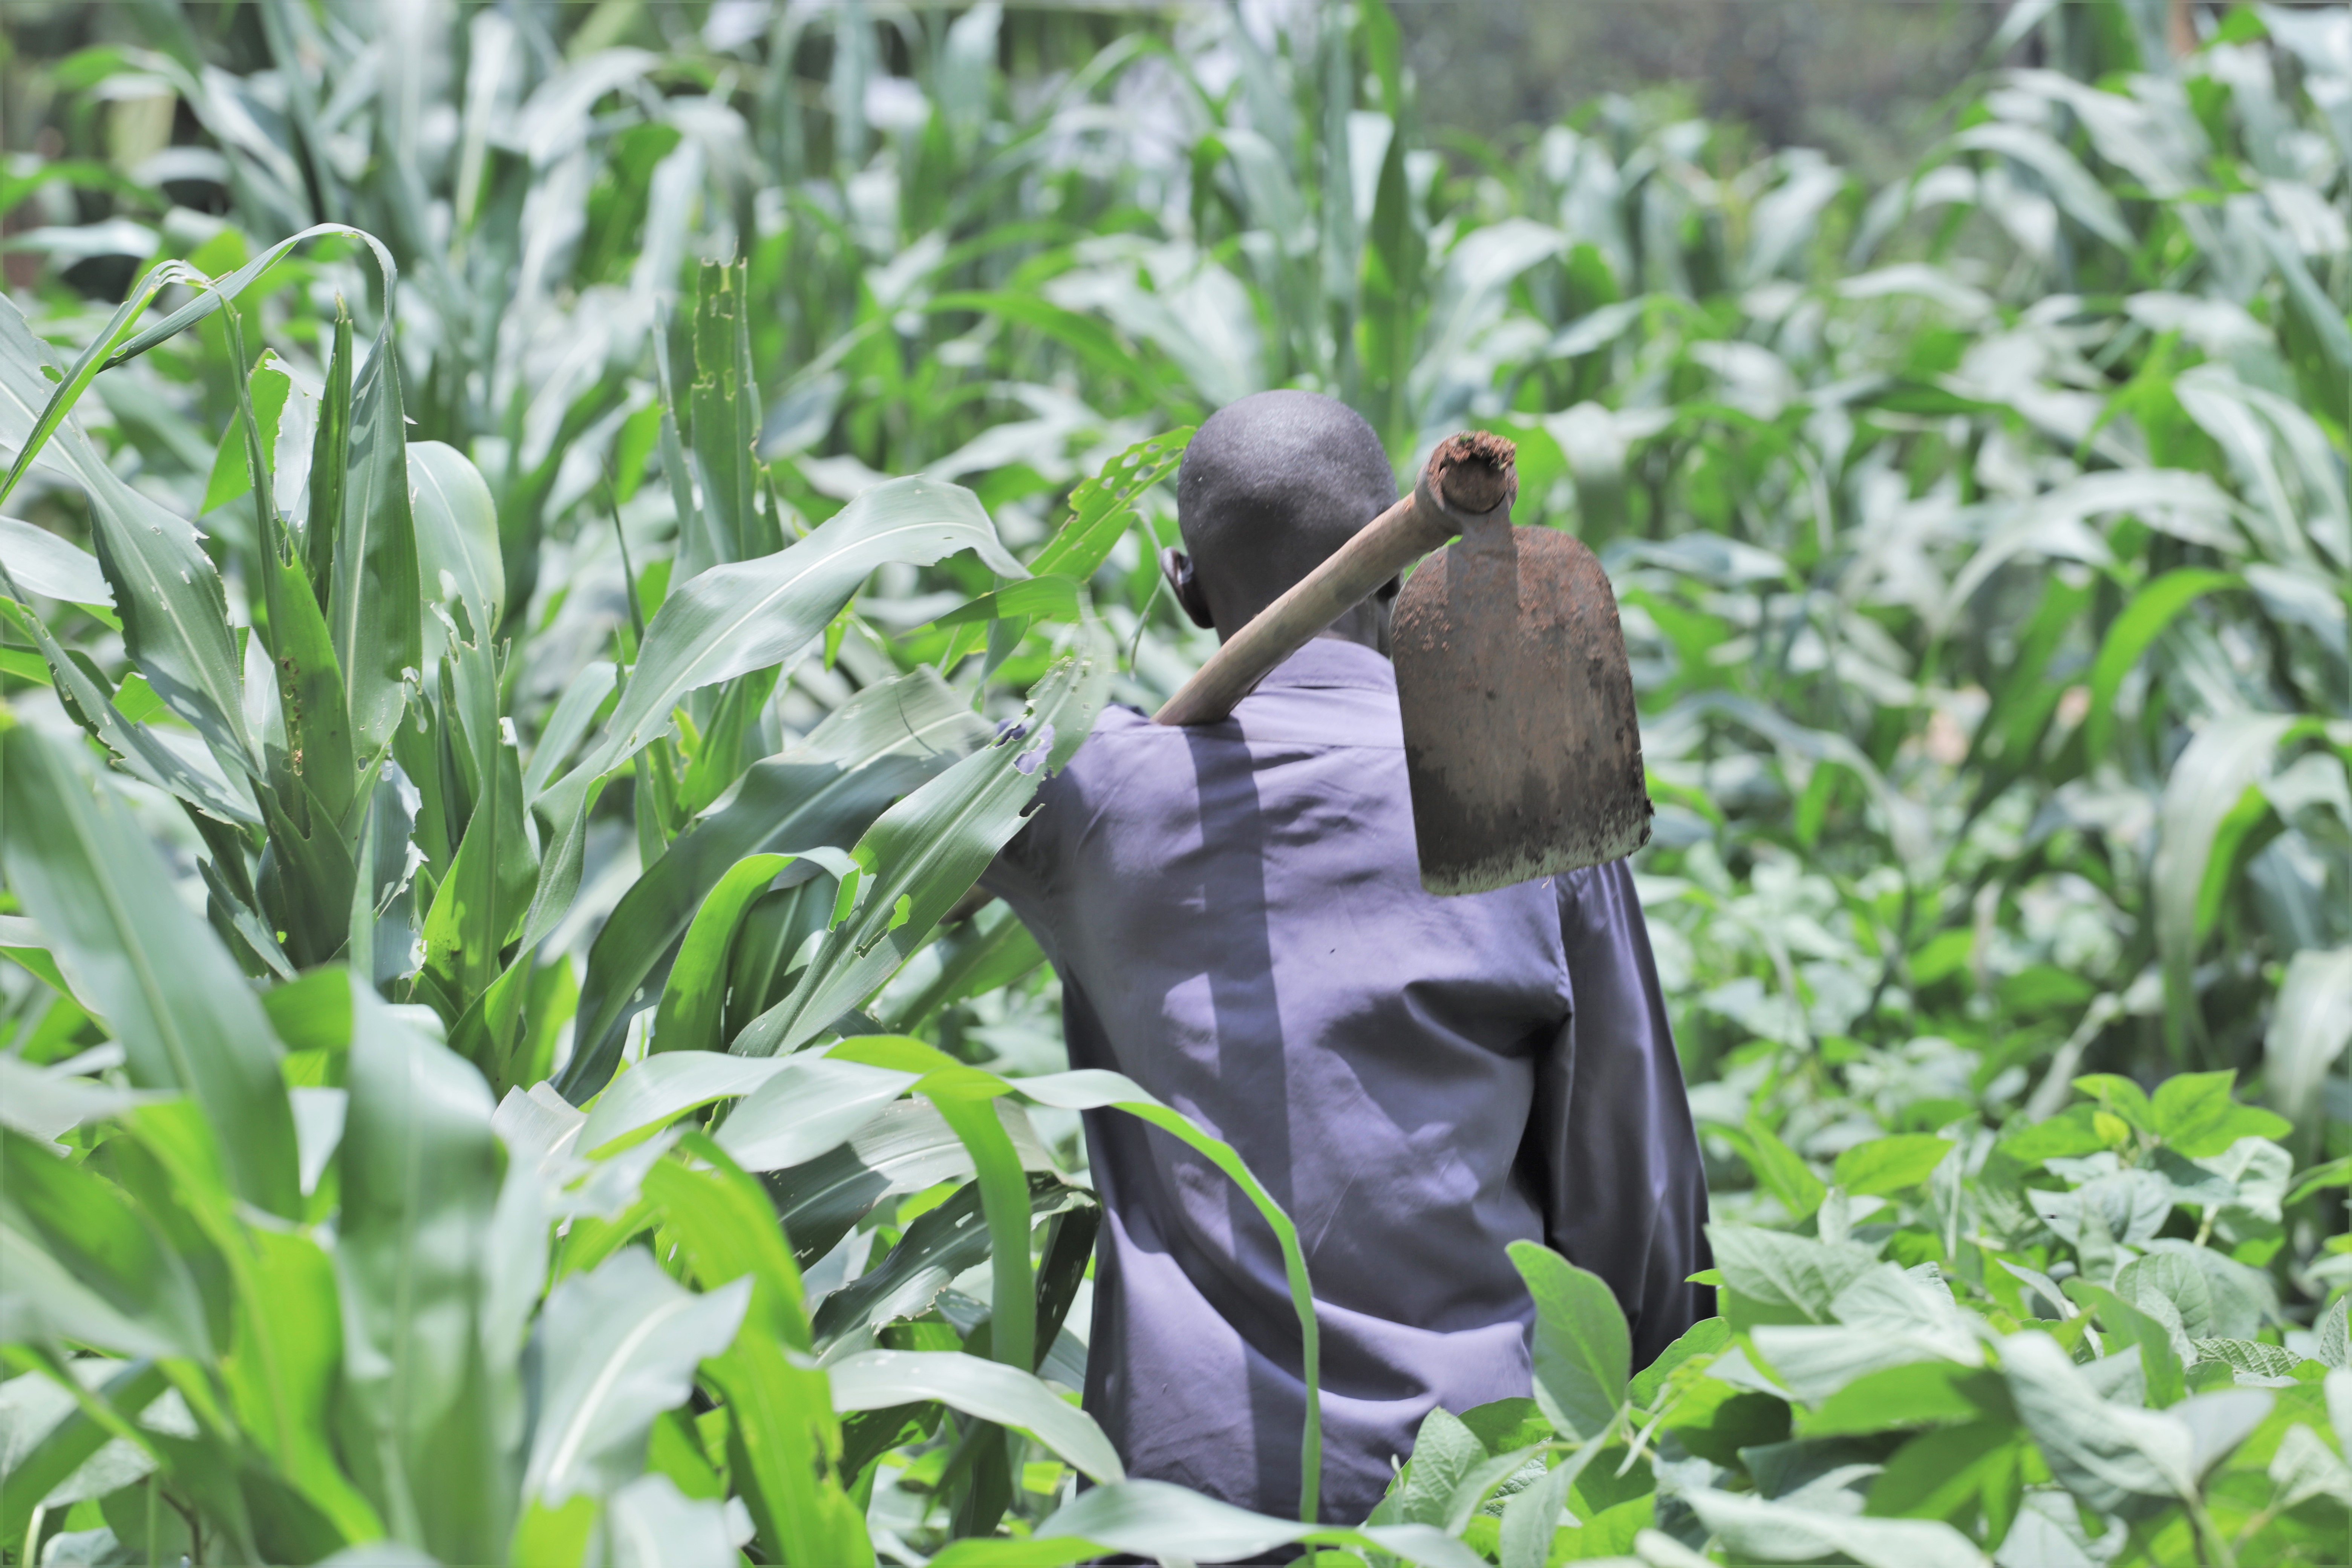 SUPPORTING SMALLHOLDER FARMERS TO ACCESS LAST MILE QUALITY INPUTS